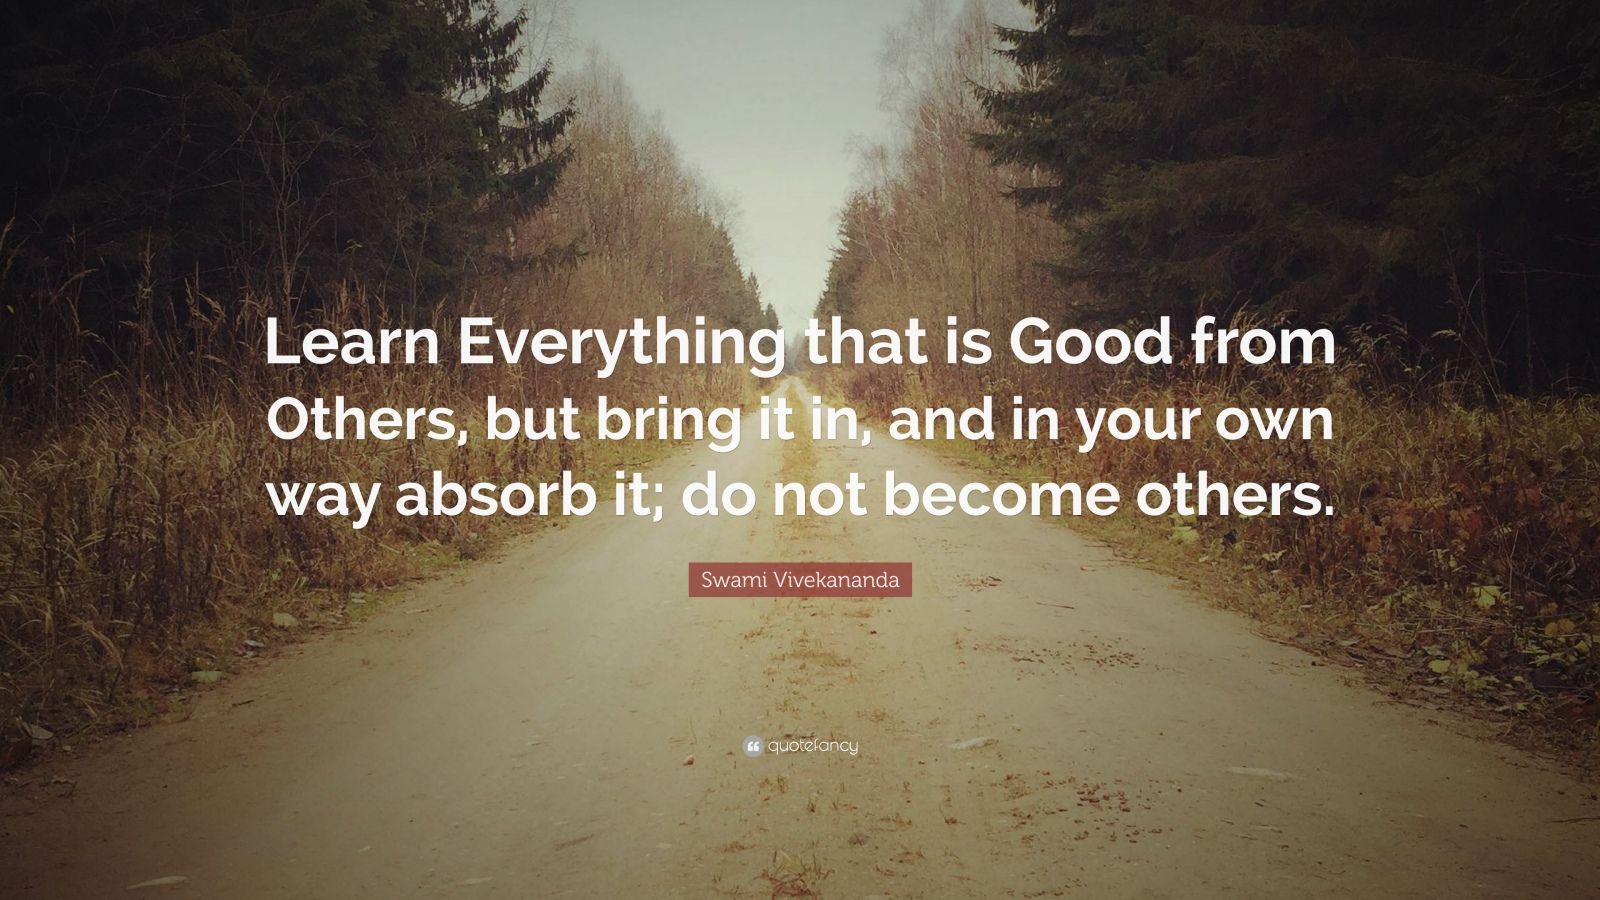 Swami Vivekananda Quote: “Learn Everything that is Good from Others